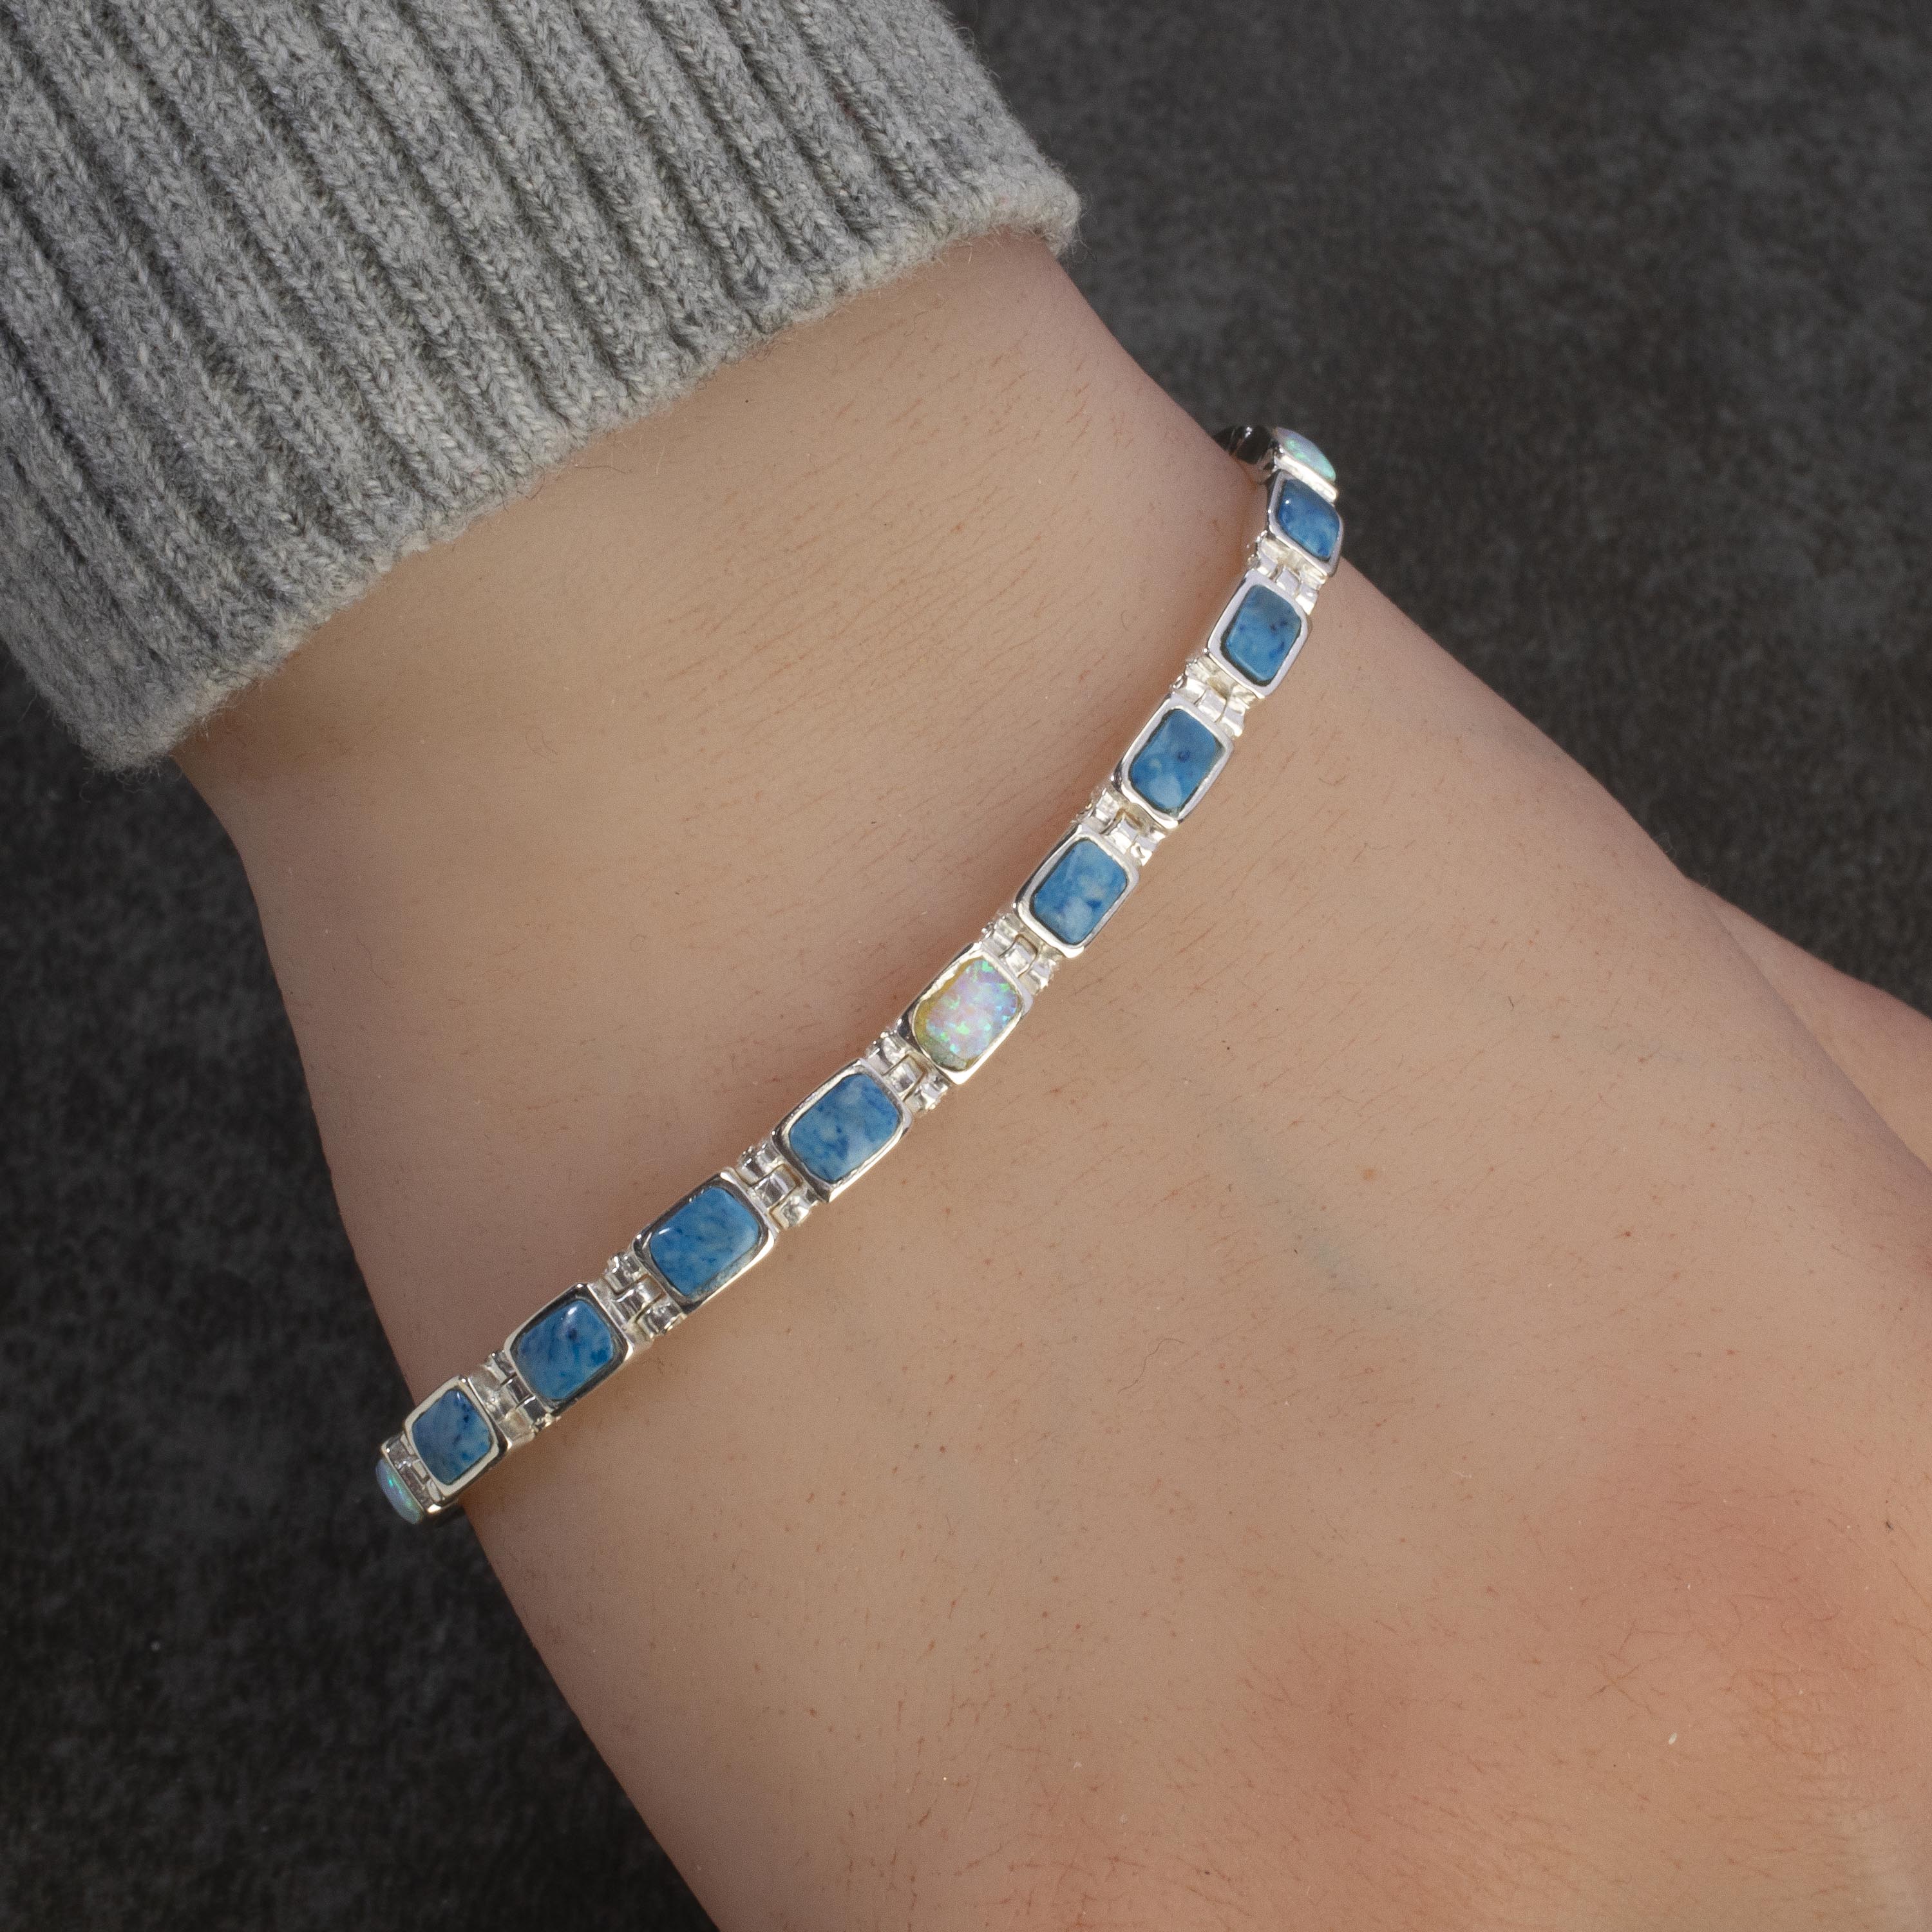 KALIFANO Southwest Silver Jewelry Denim Lapis 925 Sterling Silver Bracelet USA Handmade with Opal Accent NMB.0207.DL